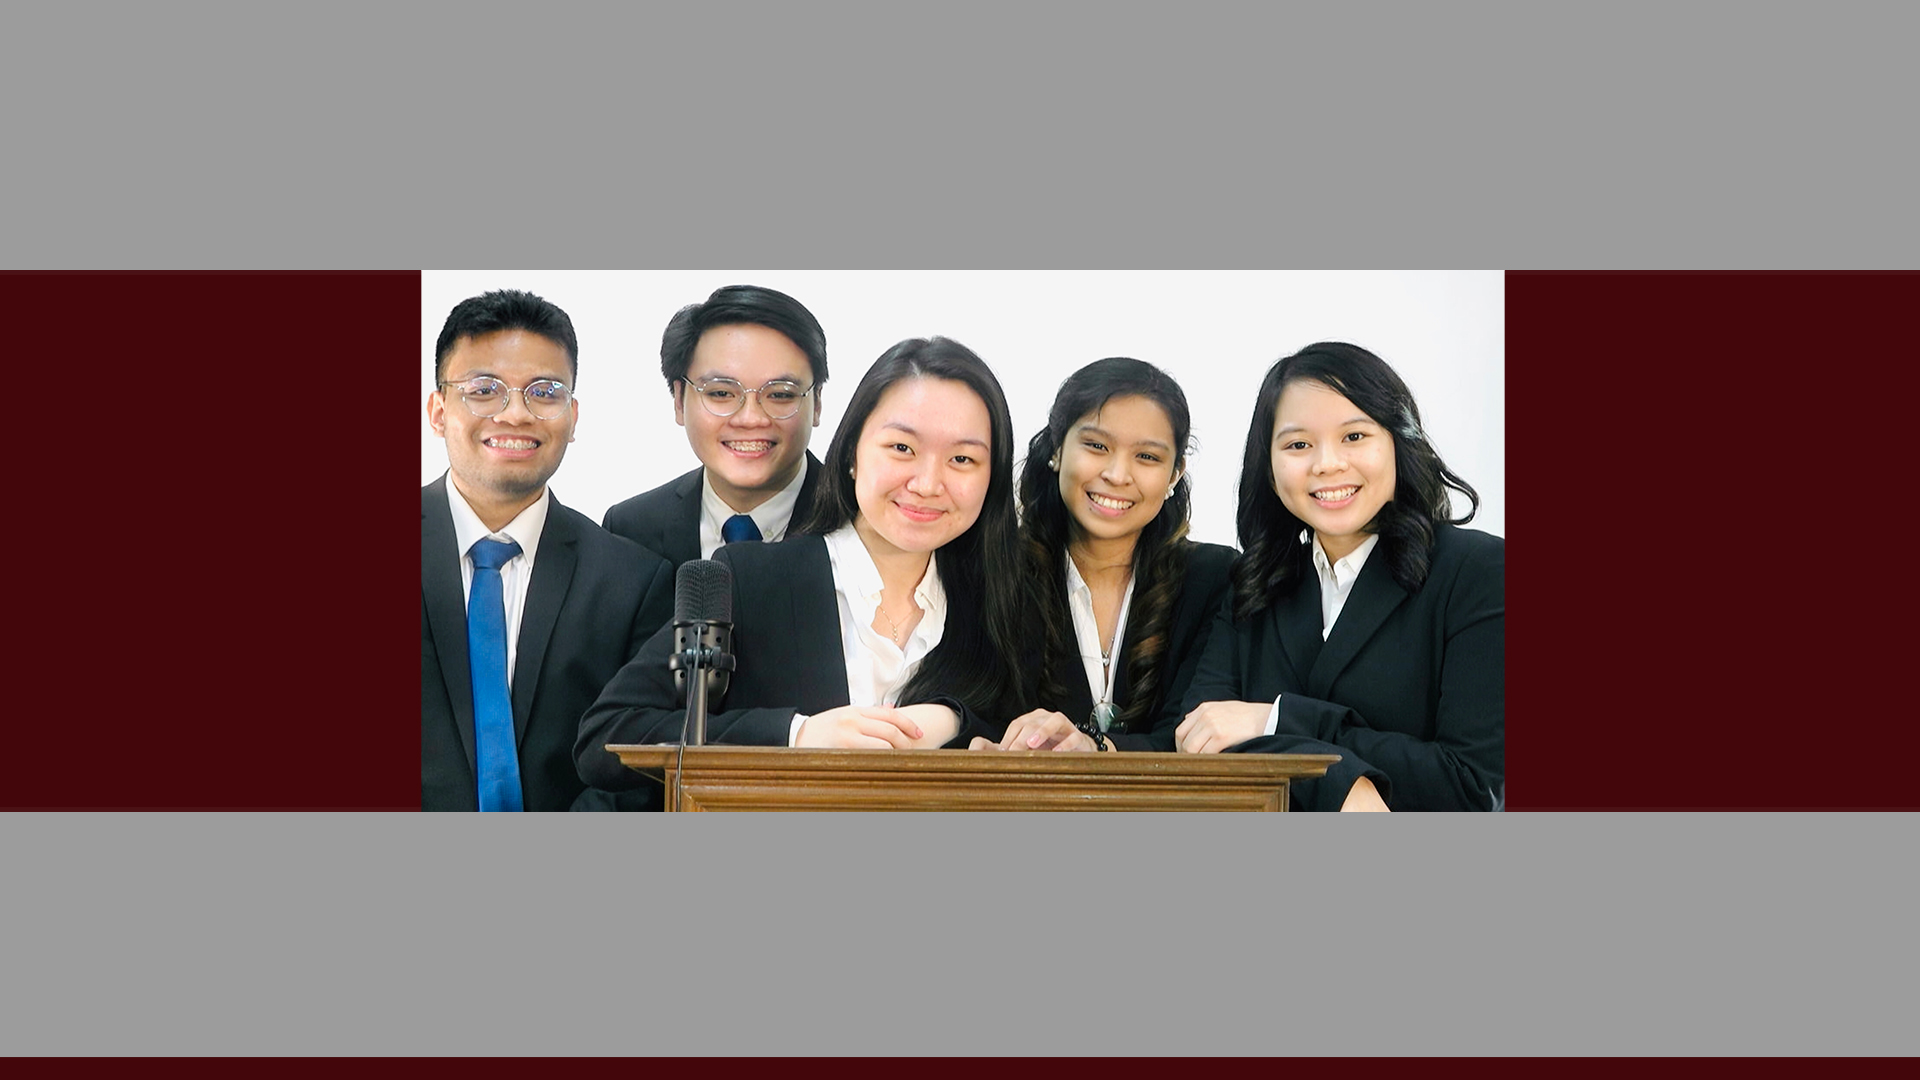 UP Law to Represent the International Finals of the Moot Court Competition